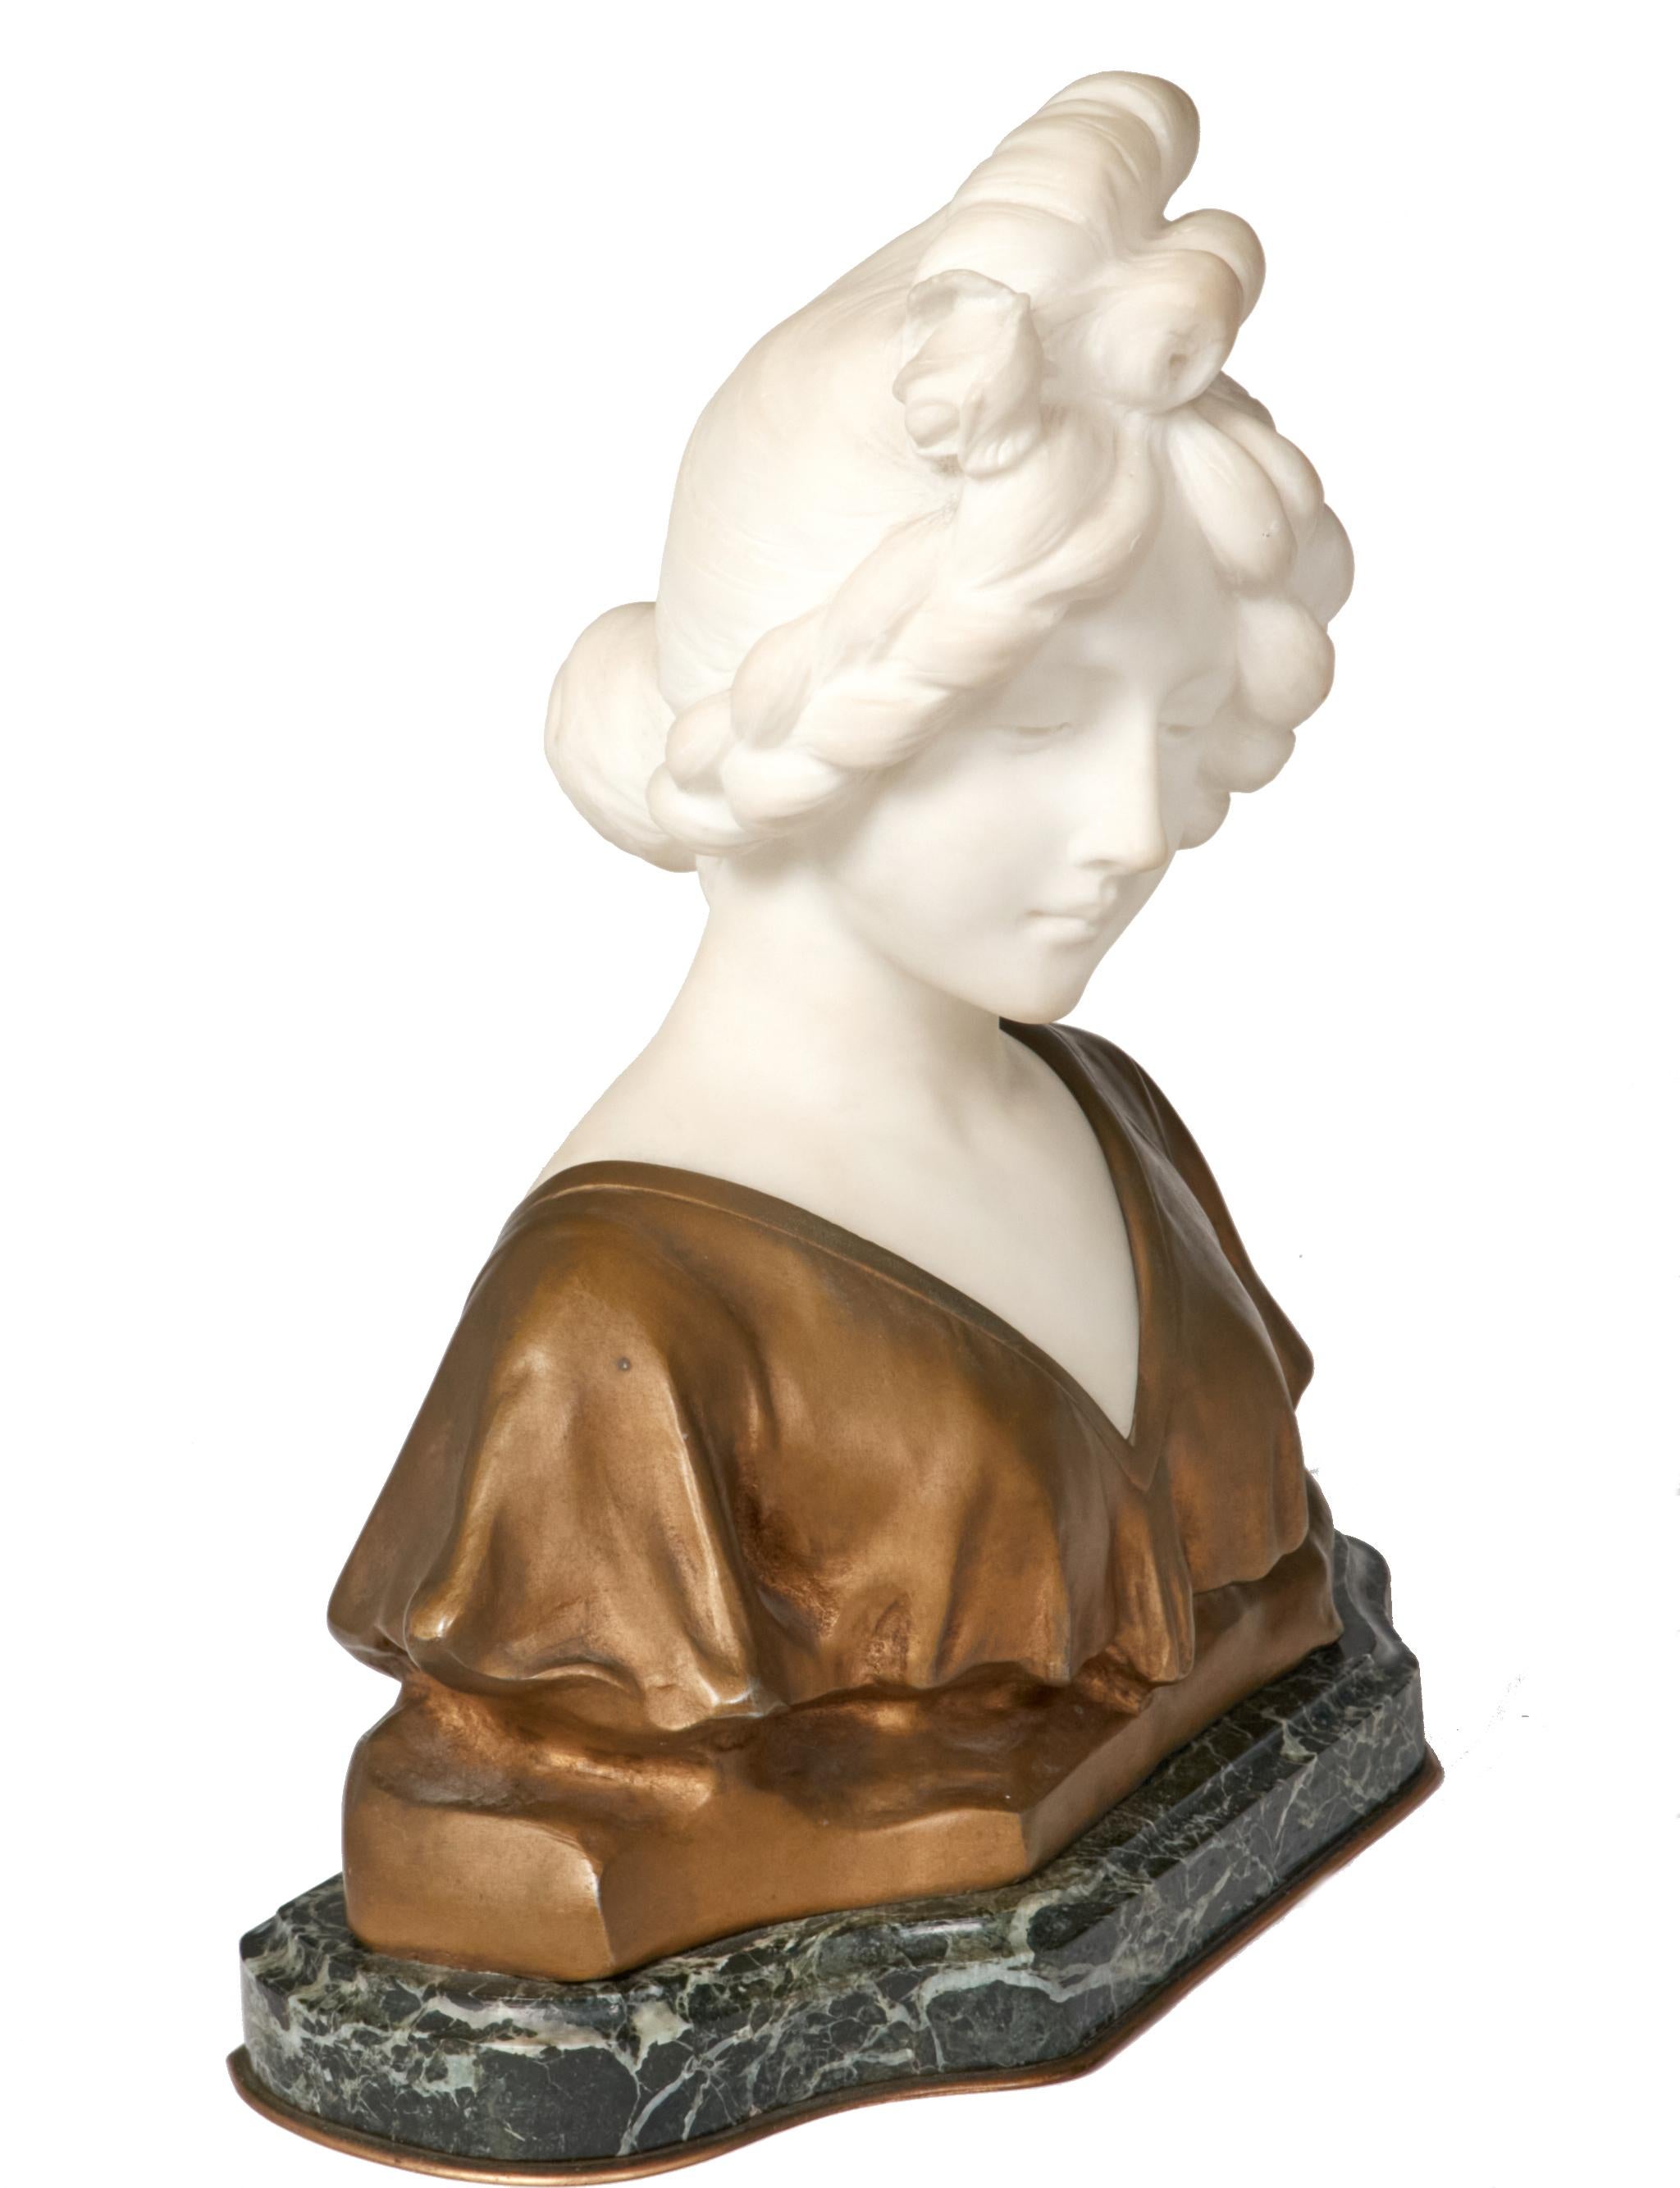 Graceful marble and bronze bust of a demure young woman by listed French/Italian artist Affortunato Gory (1895-1925). Beautifully rendered bust in marble with her hair pulled back and wearing a draped gown sculpted from bronze. Presented on a dark